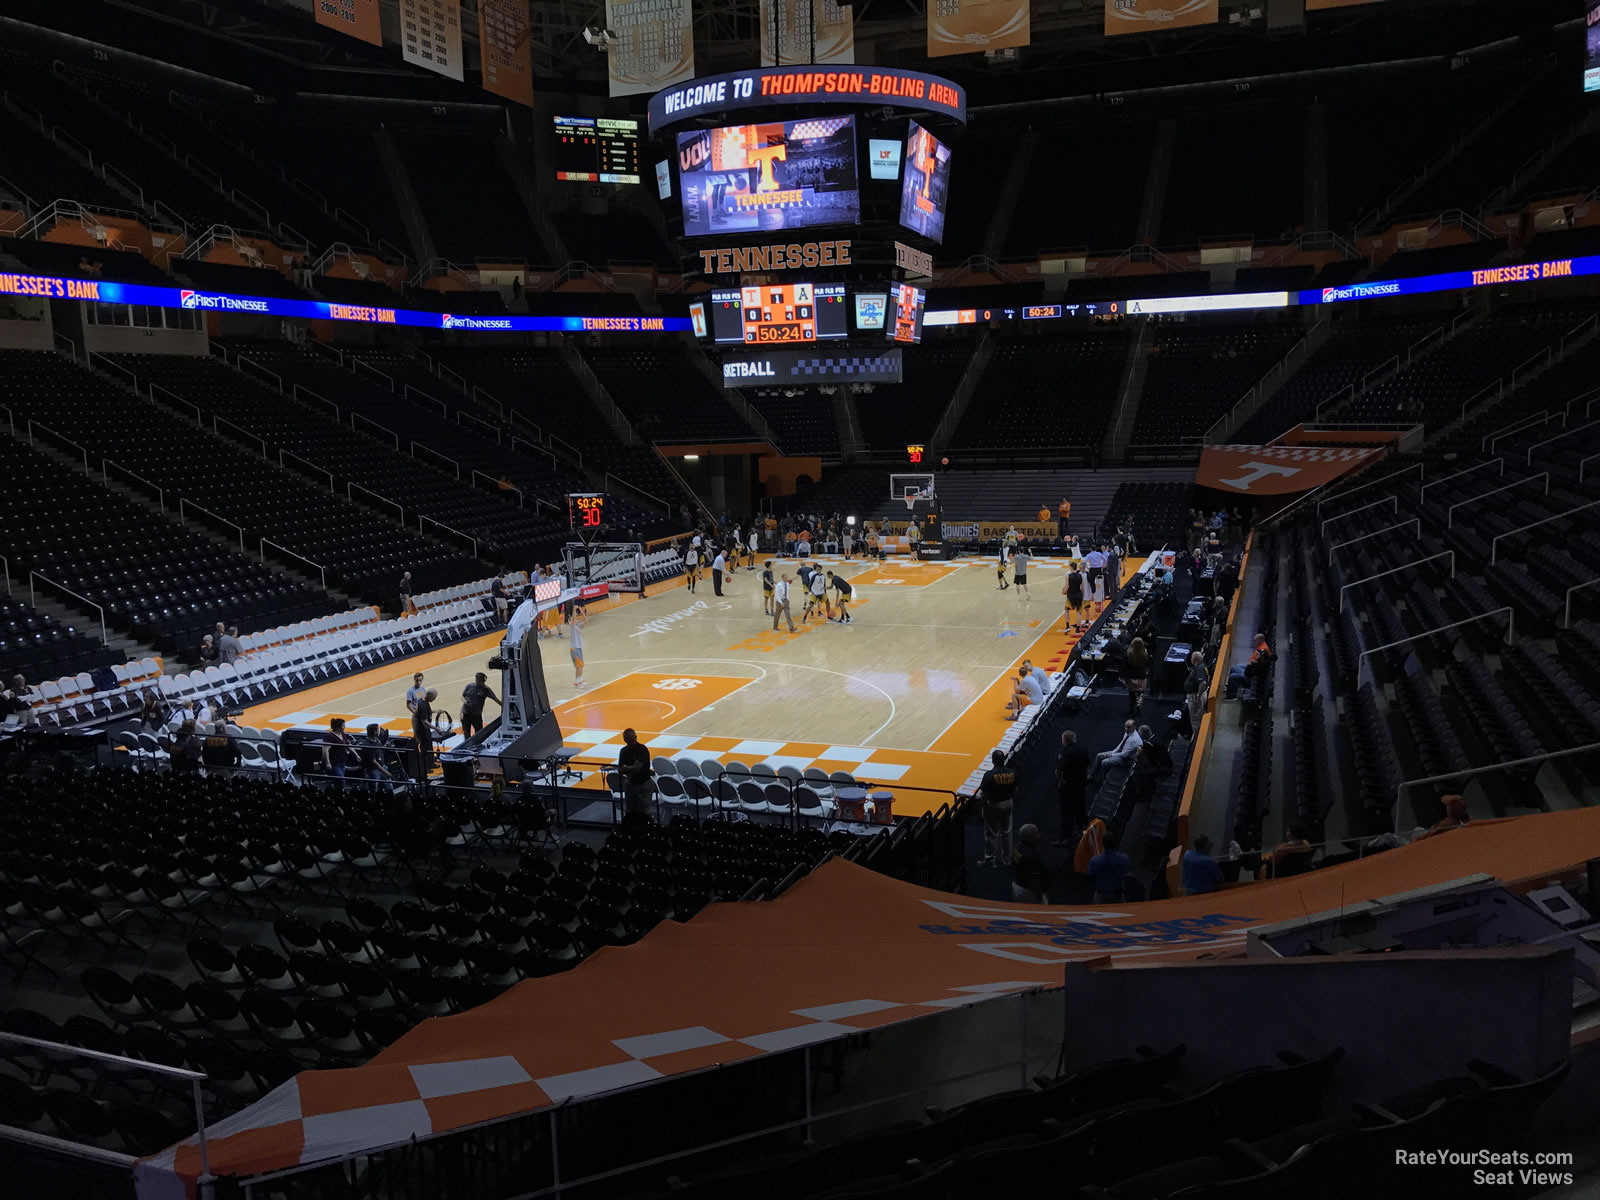 section 111, row 17 seat view  - thompson-boling arena